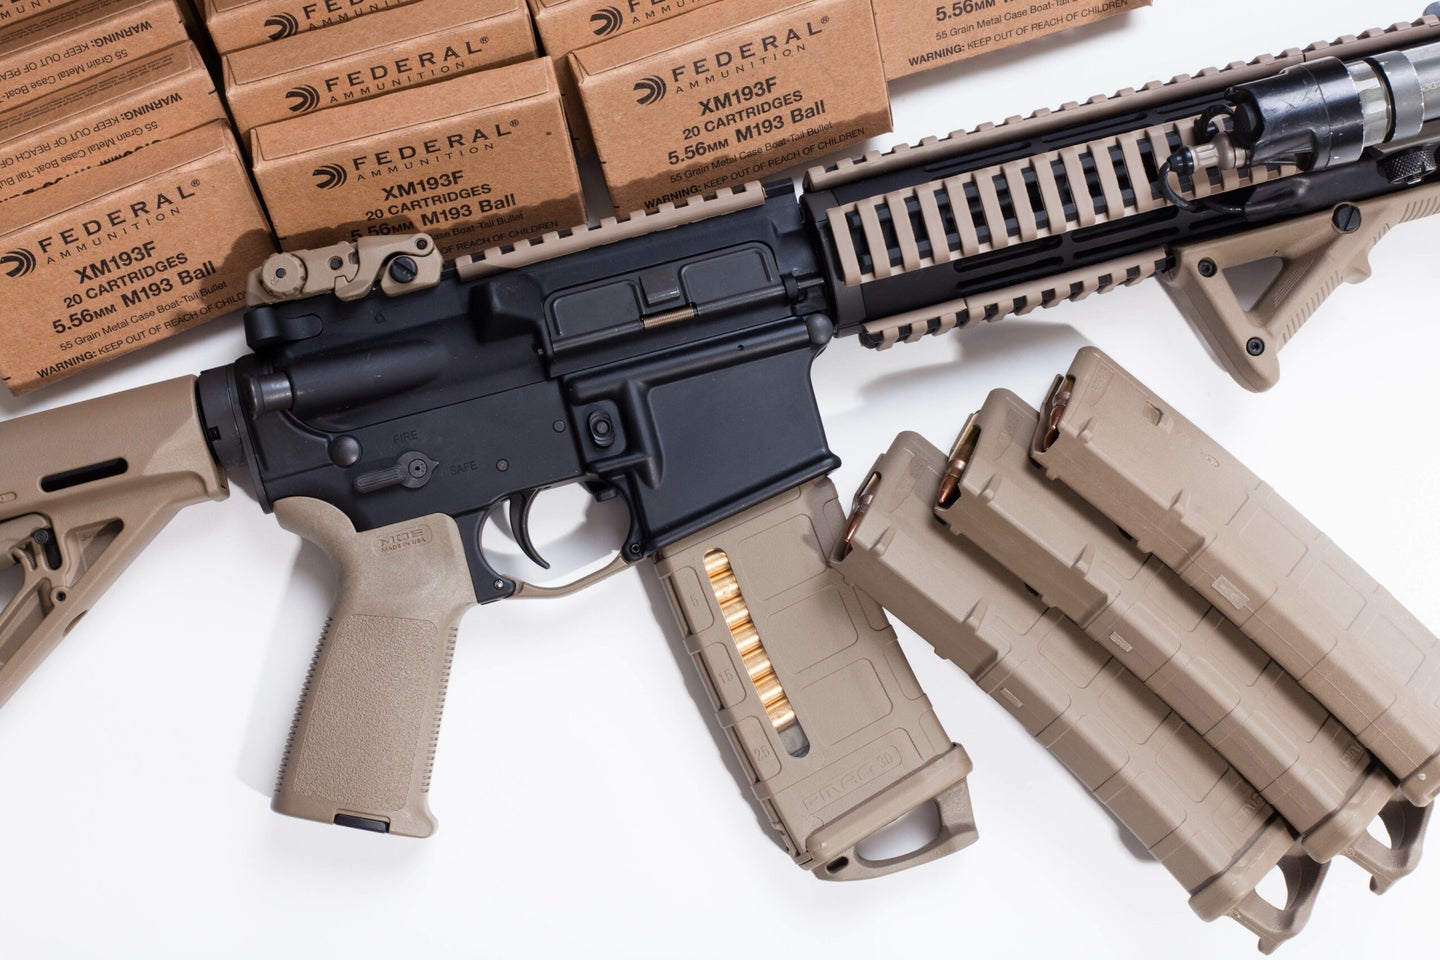 An AR-15 rifle and magazines.